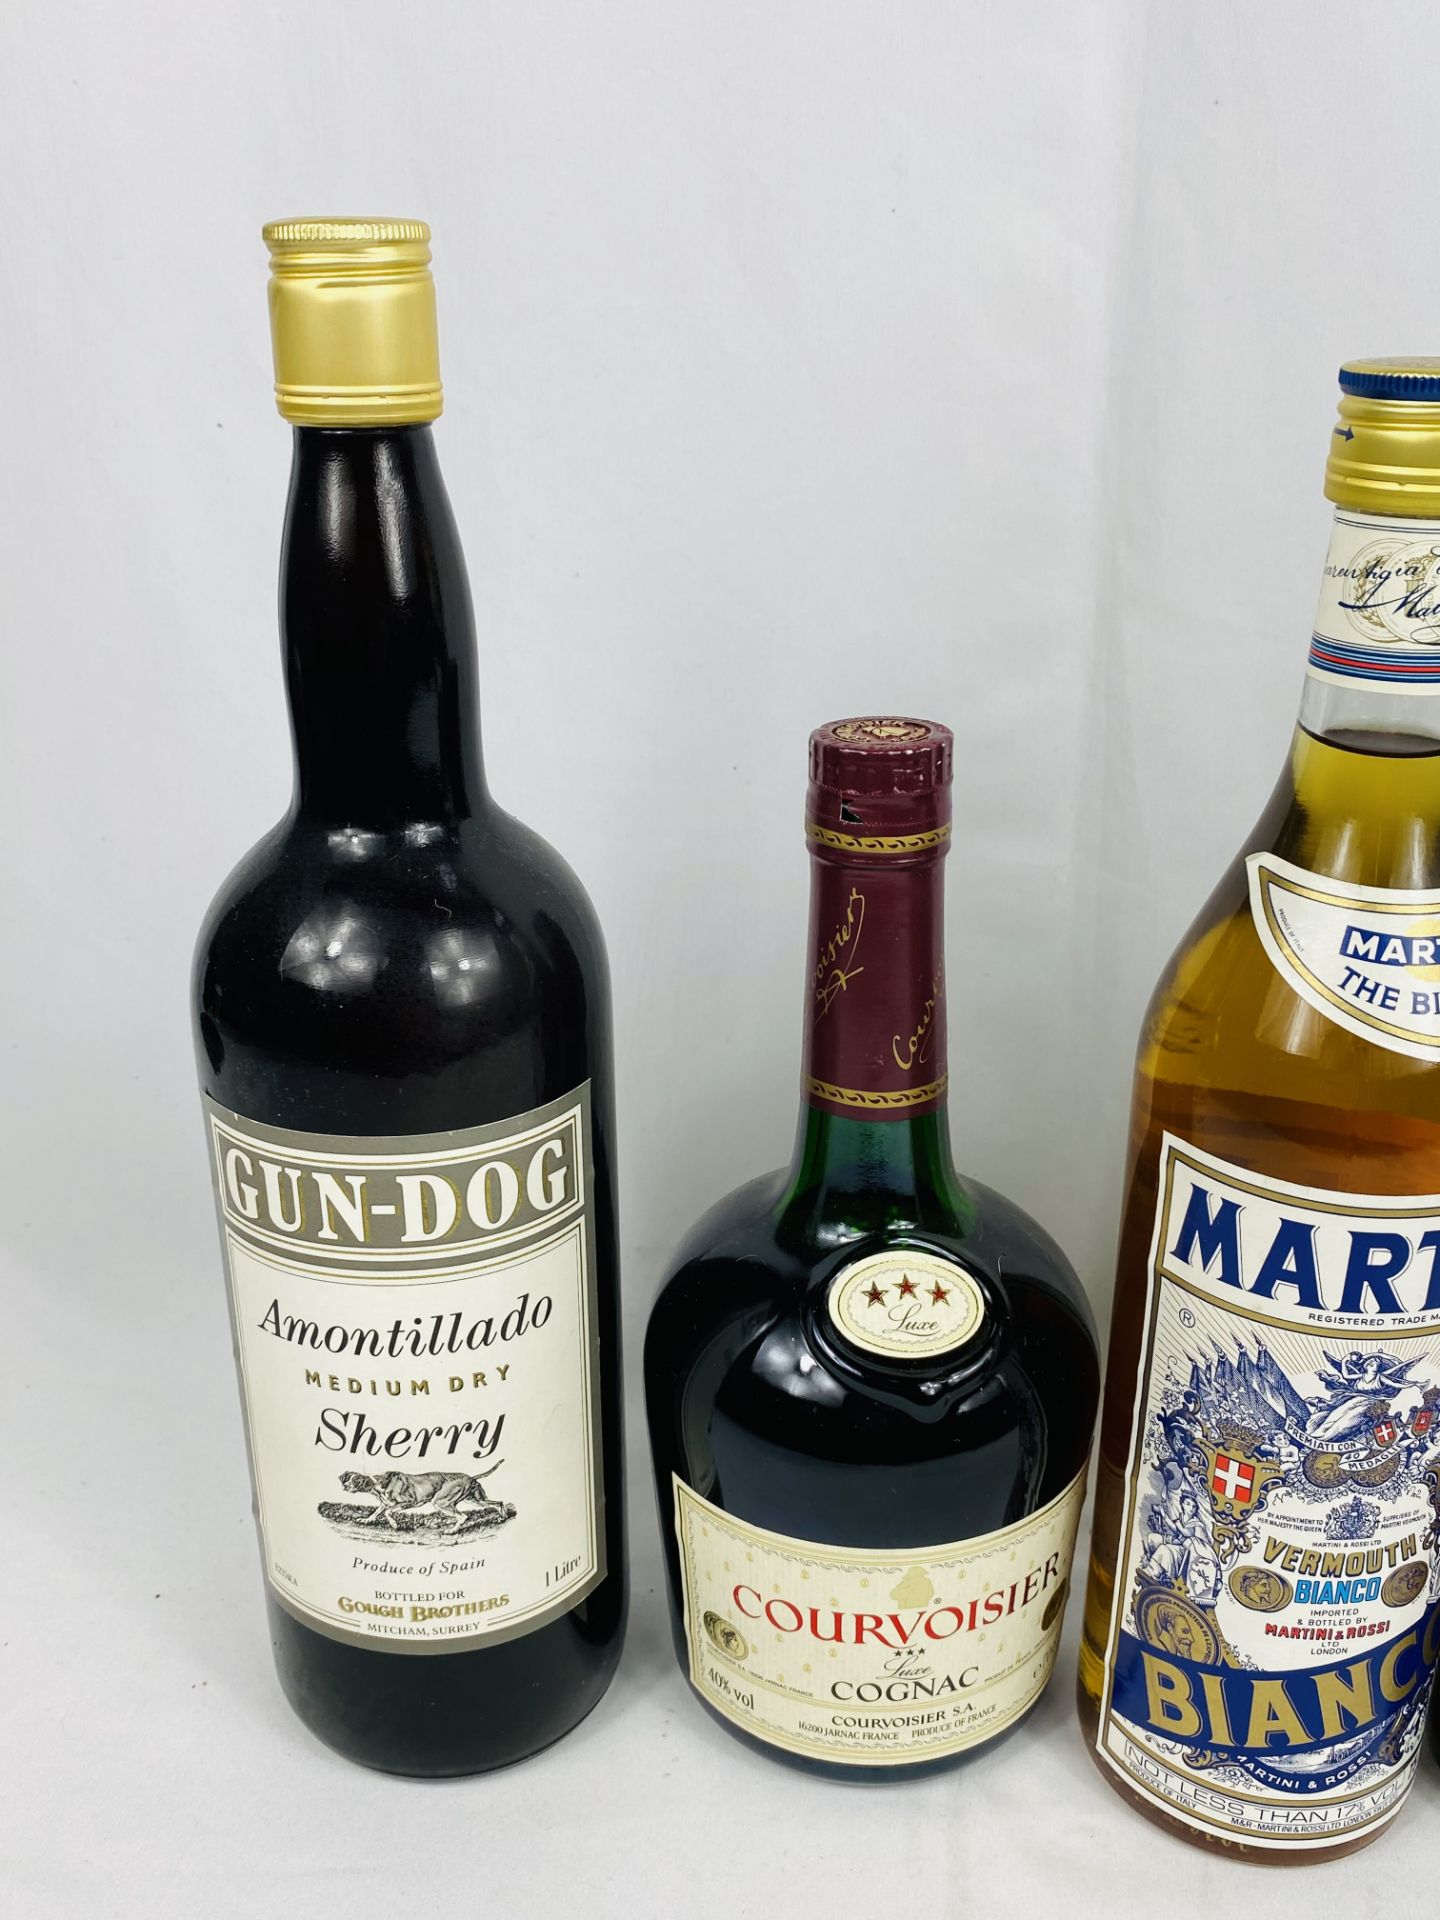 75cl bottle of Courvoisier cognac, three bottles of sherry and one other - Image 3 of 4